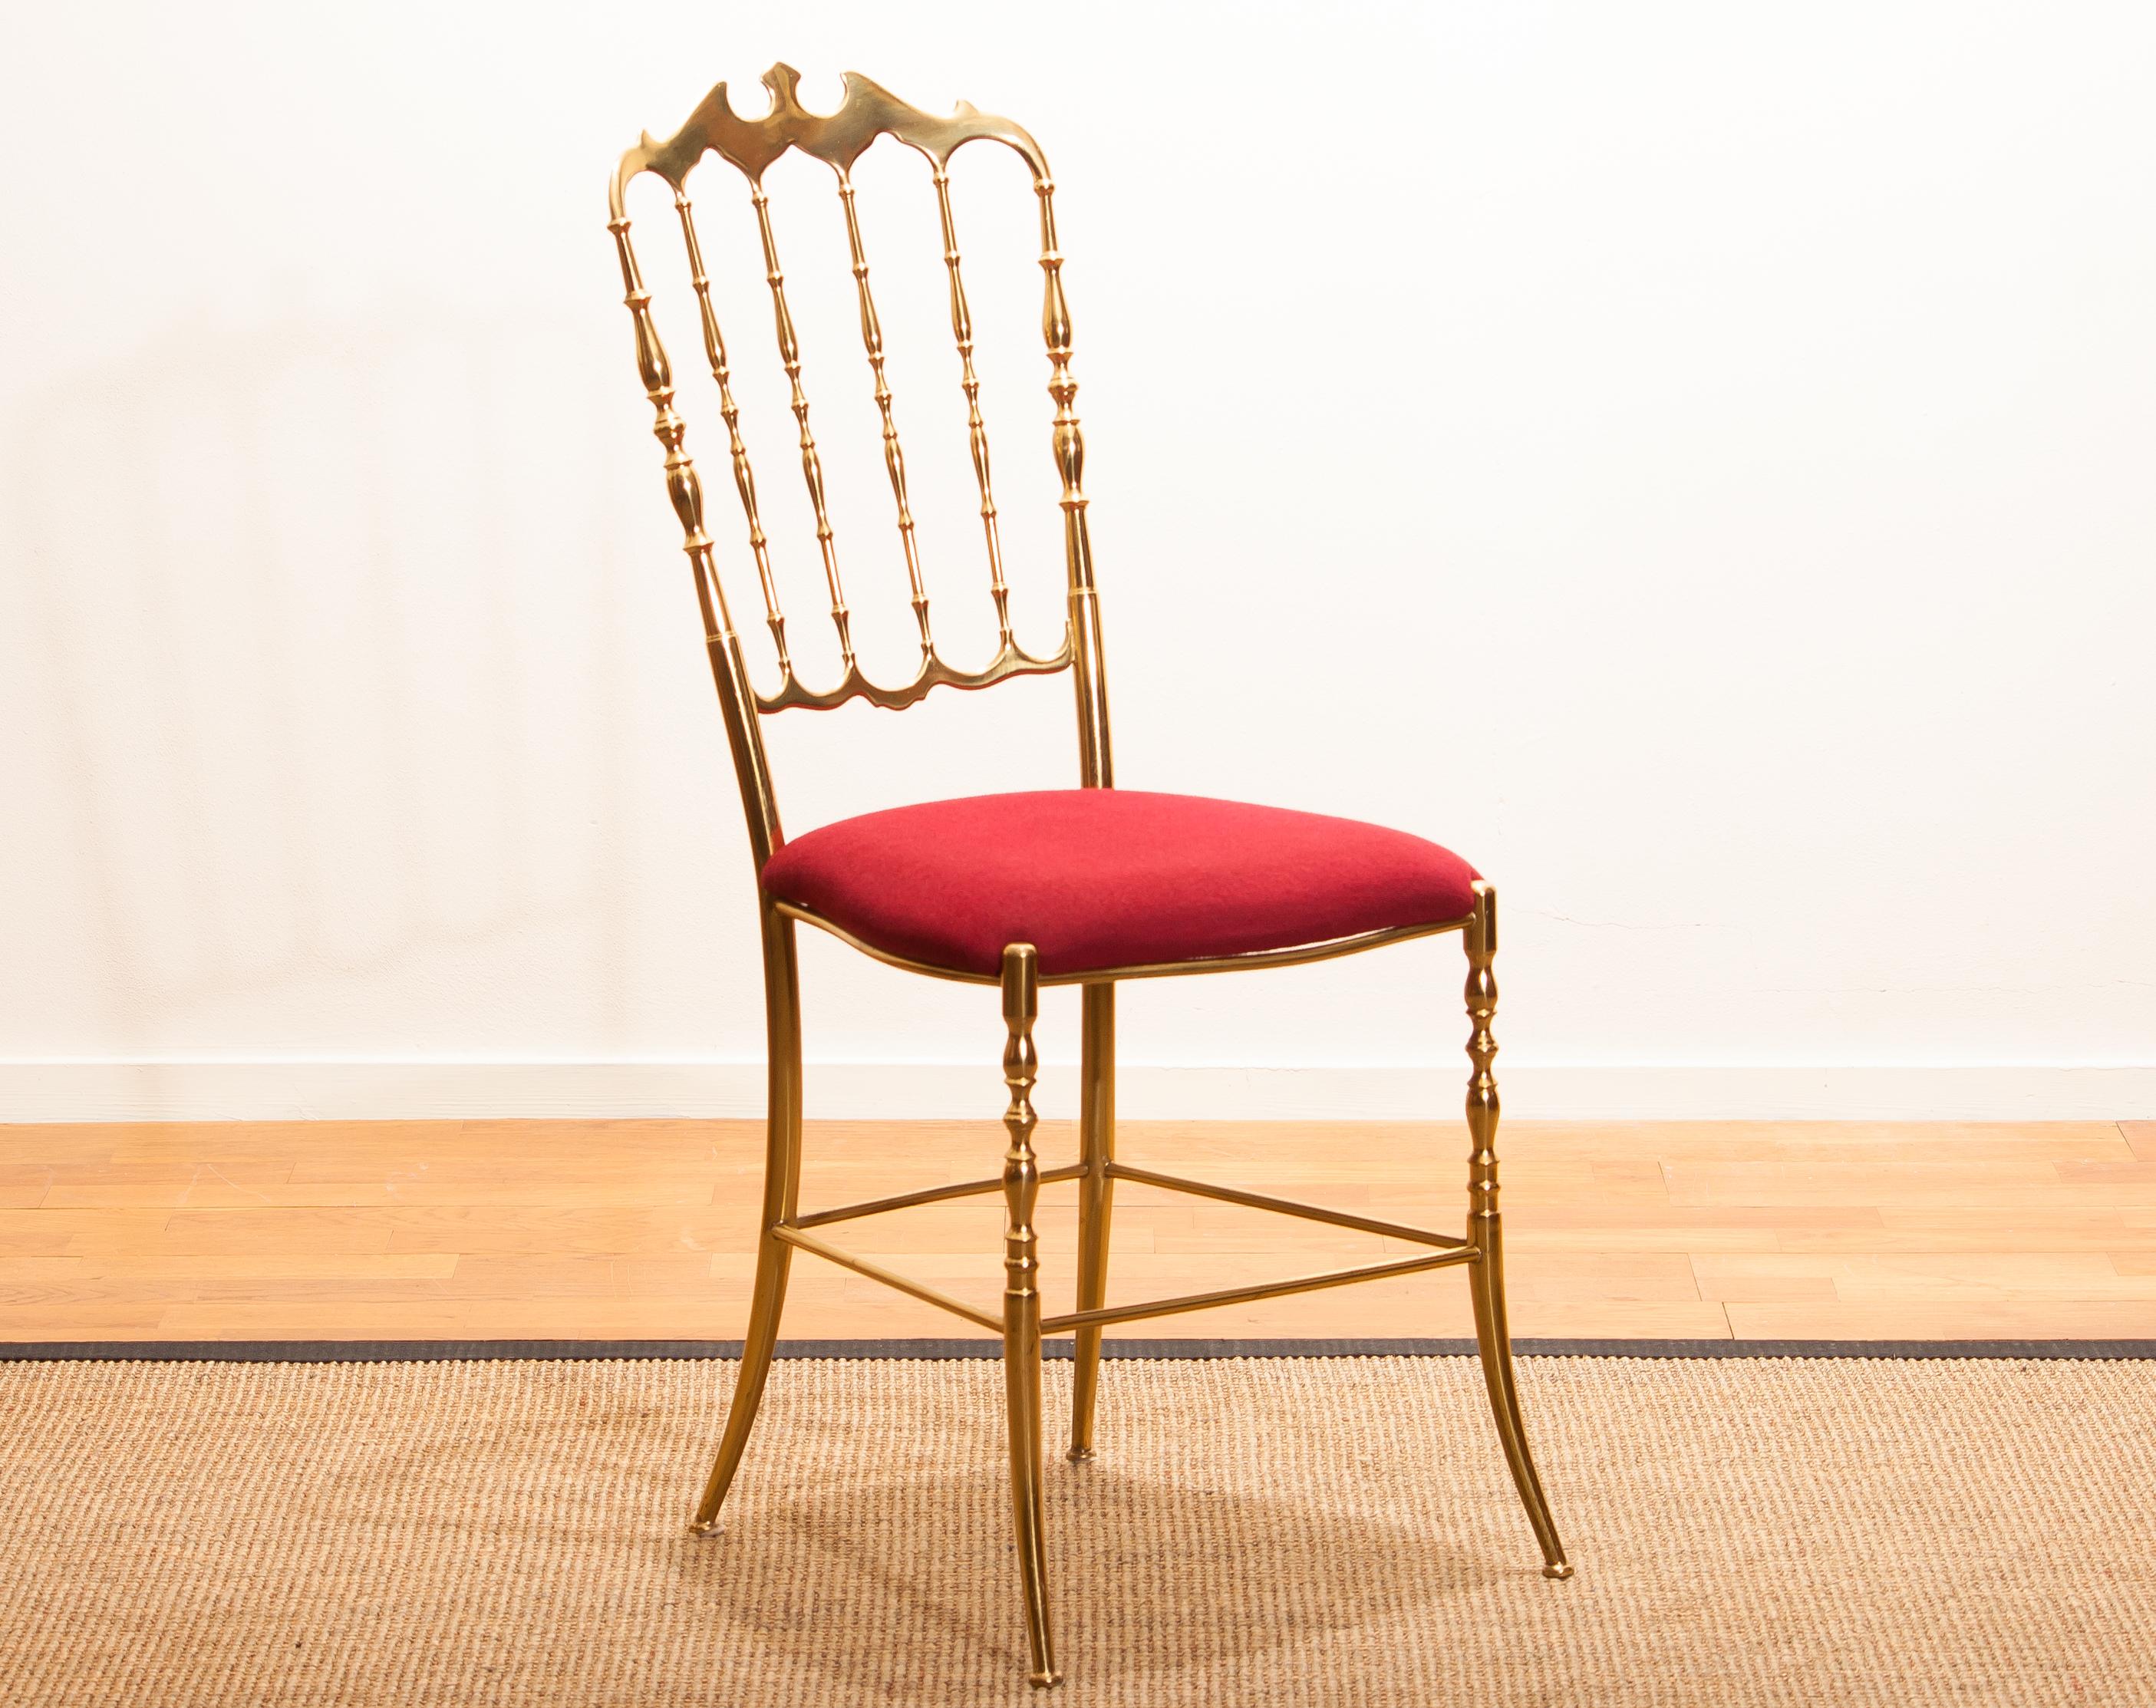 Beautiful chair made by Chiavari, Italy.
This chair is made of solid brass with a red velours seating.
It is in a wonderful condition.
Period 1950s.
Dimensions: H 80 cm, W 40 cm, D 48 cm, SH 45 cm.